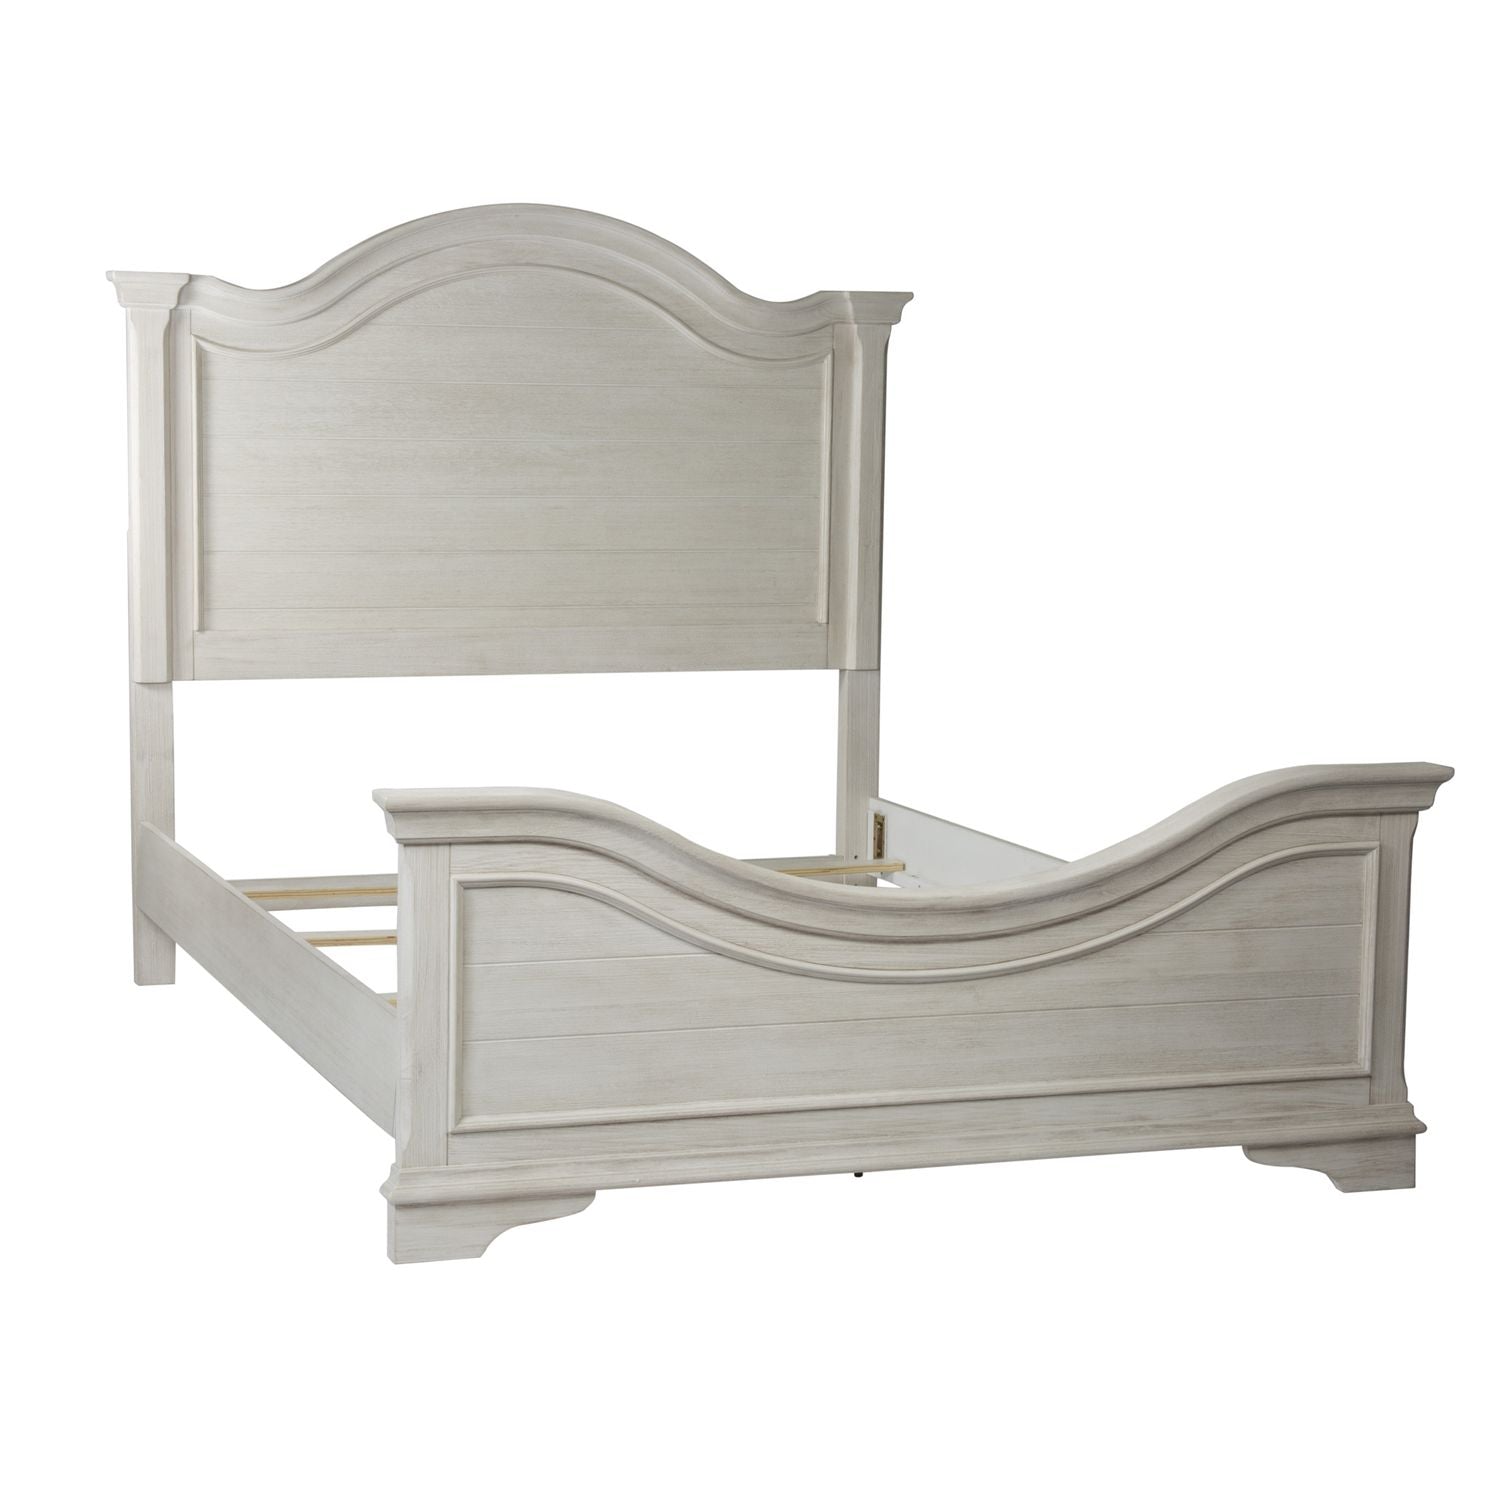 Bayside 249-BR Bedroom Collection from Liberty Furniture